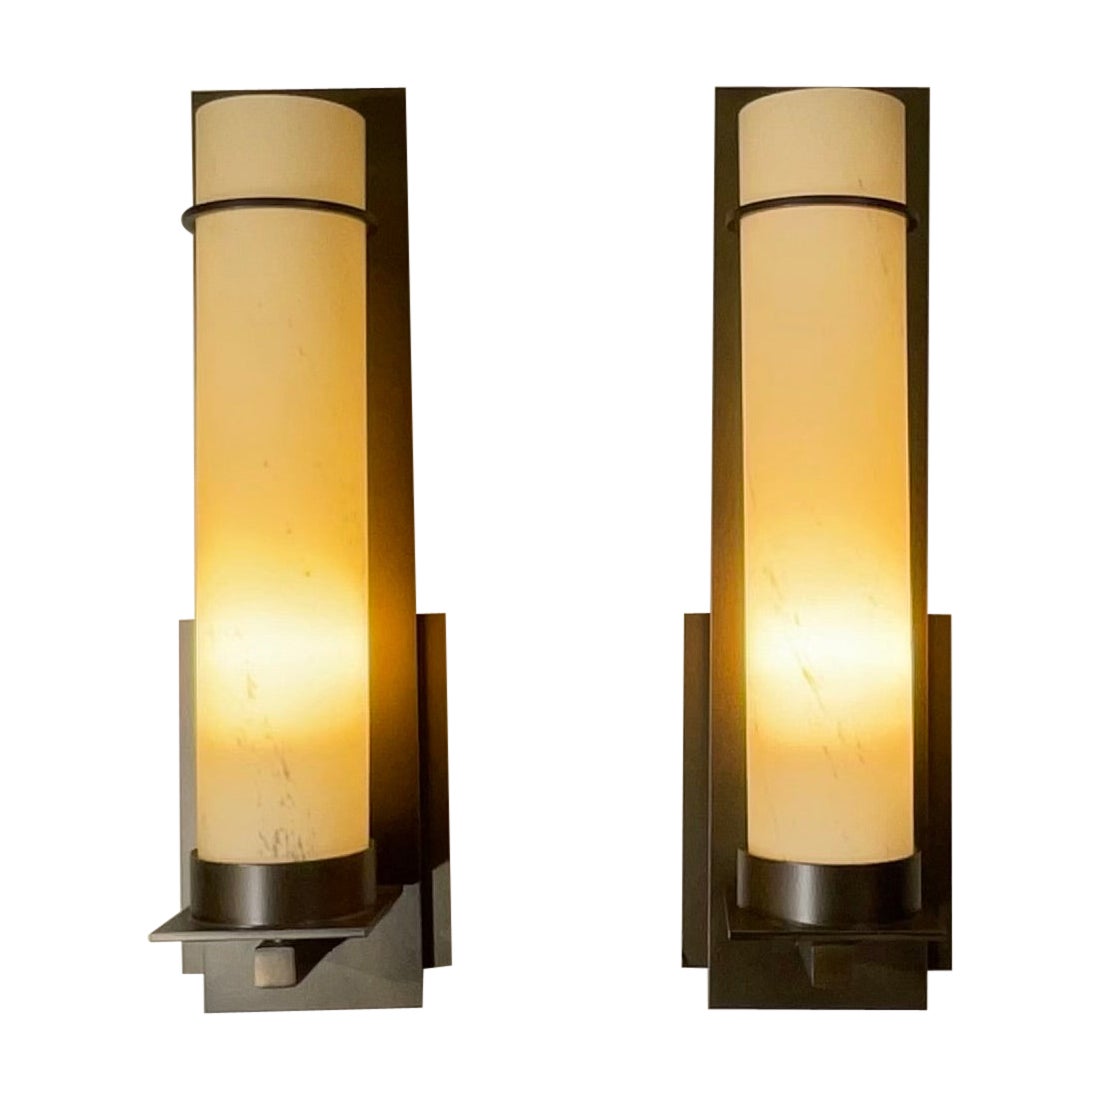 Pair Of After Hours Indoor Wall Sconces By Hubbardton Forge 